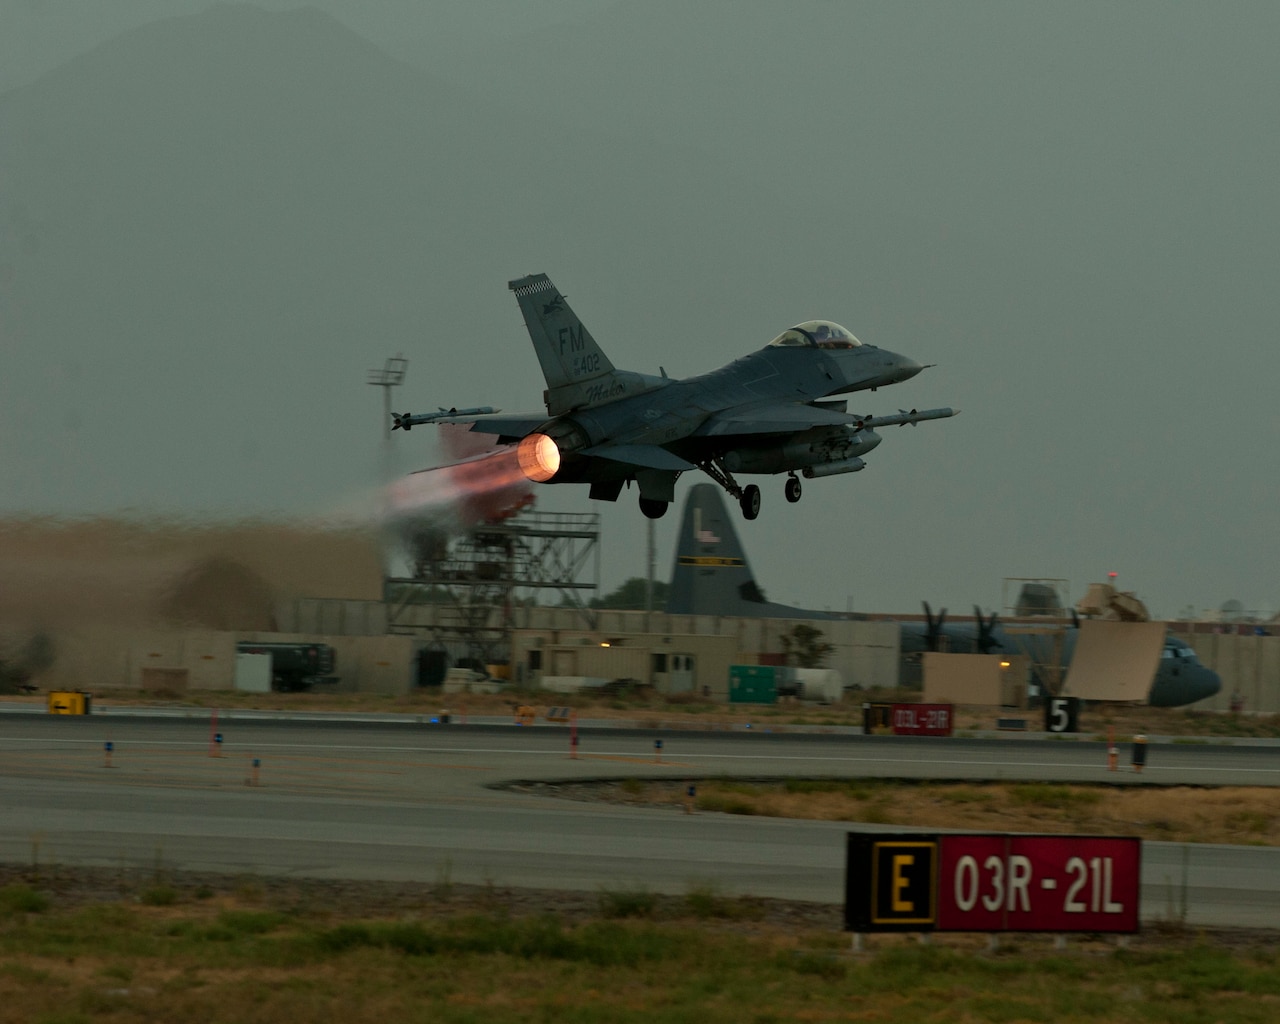 An F-16C Fighting Falcon takes off for mission in the skies of Afghanistan Aug. 22, 2016, Bagram Airfield, Afghanistan. F-16s deployed to Bagram Airfield provide over watch and close air support to U.S. and coalition forces through the Afghanistan area of operation. (U.S. Air Force photo by Capt. Korey Fratini)